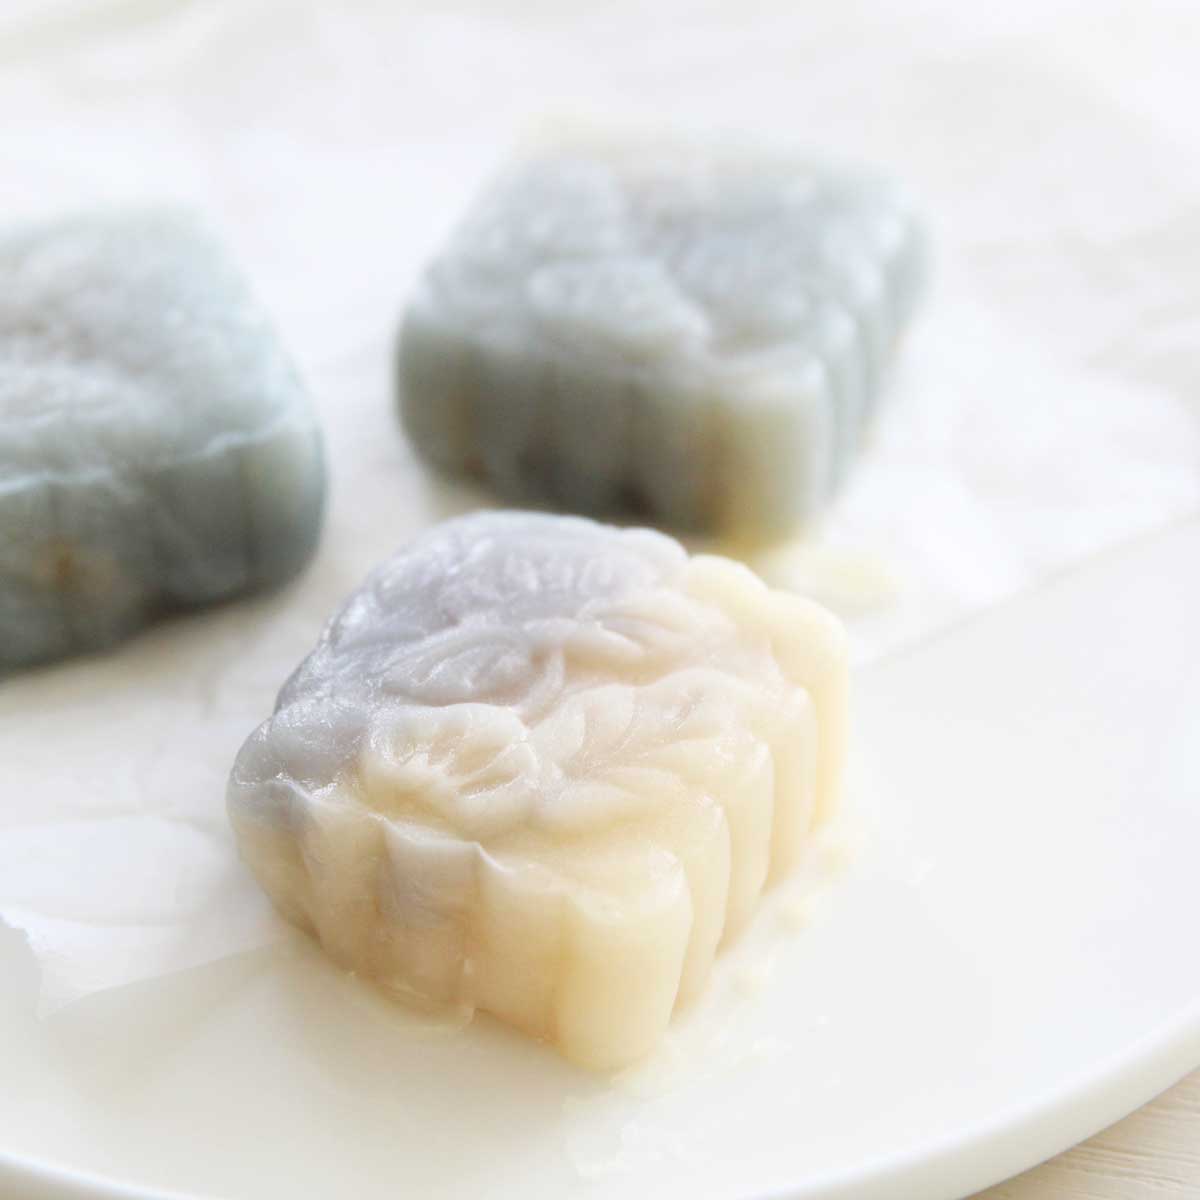 10 Minute Butterfly Pea Snowskin Mooncakes (No Steaming Required!) - Pecan Pie Bars